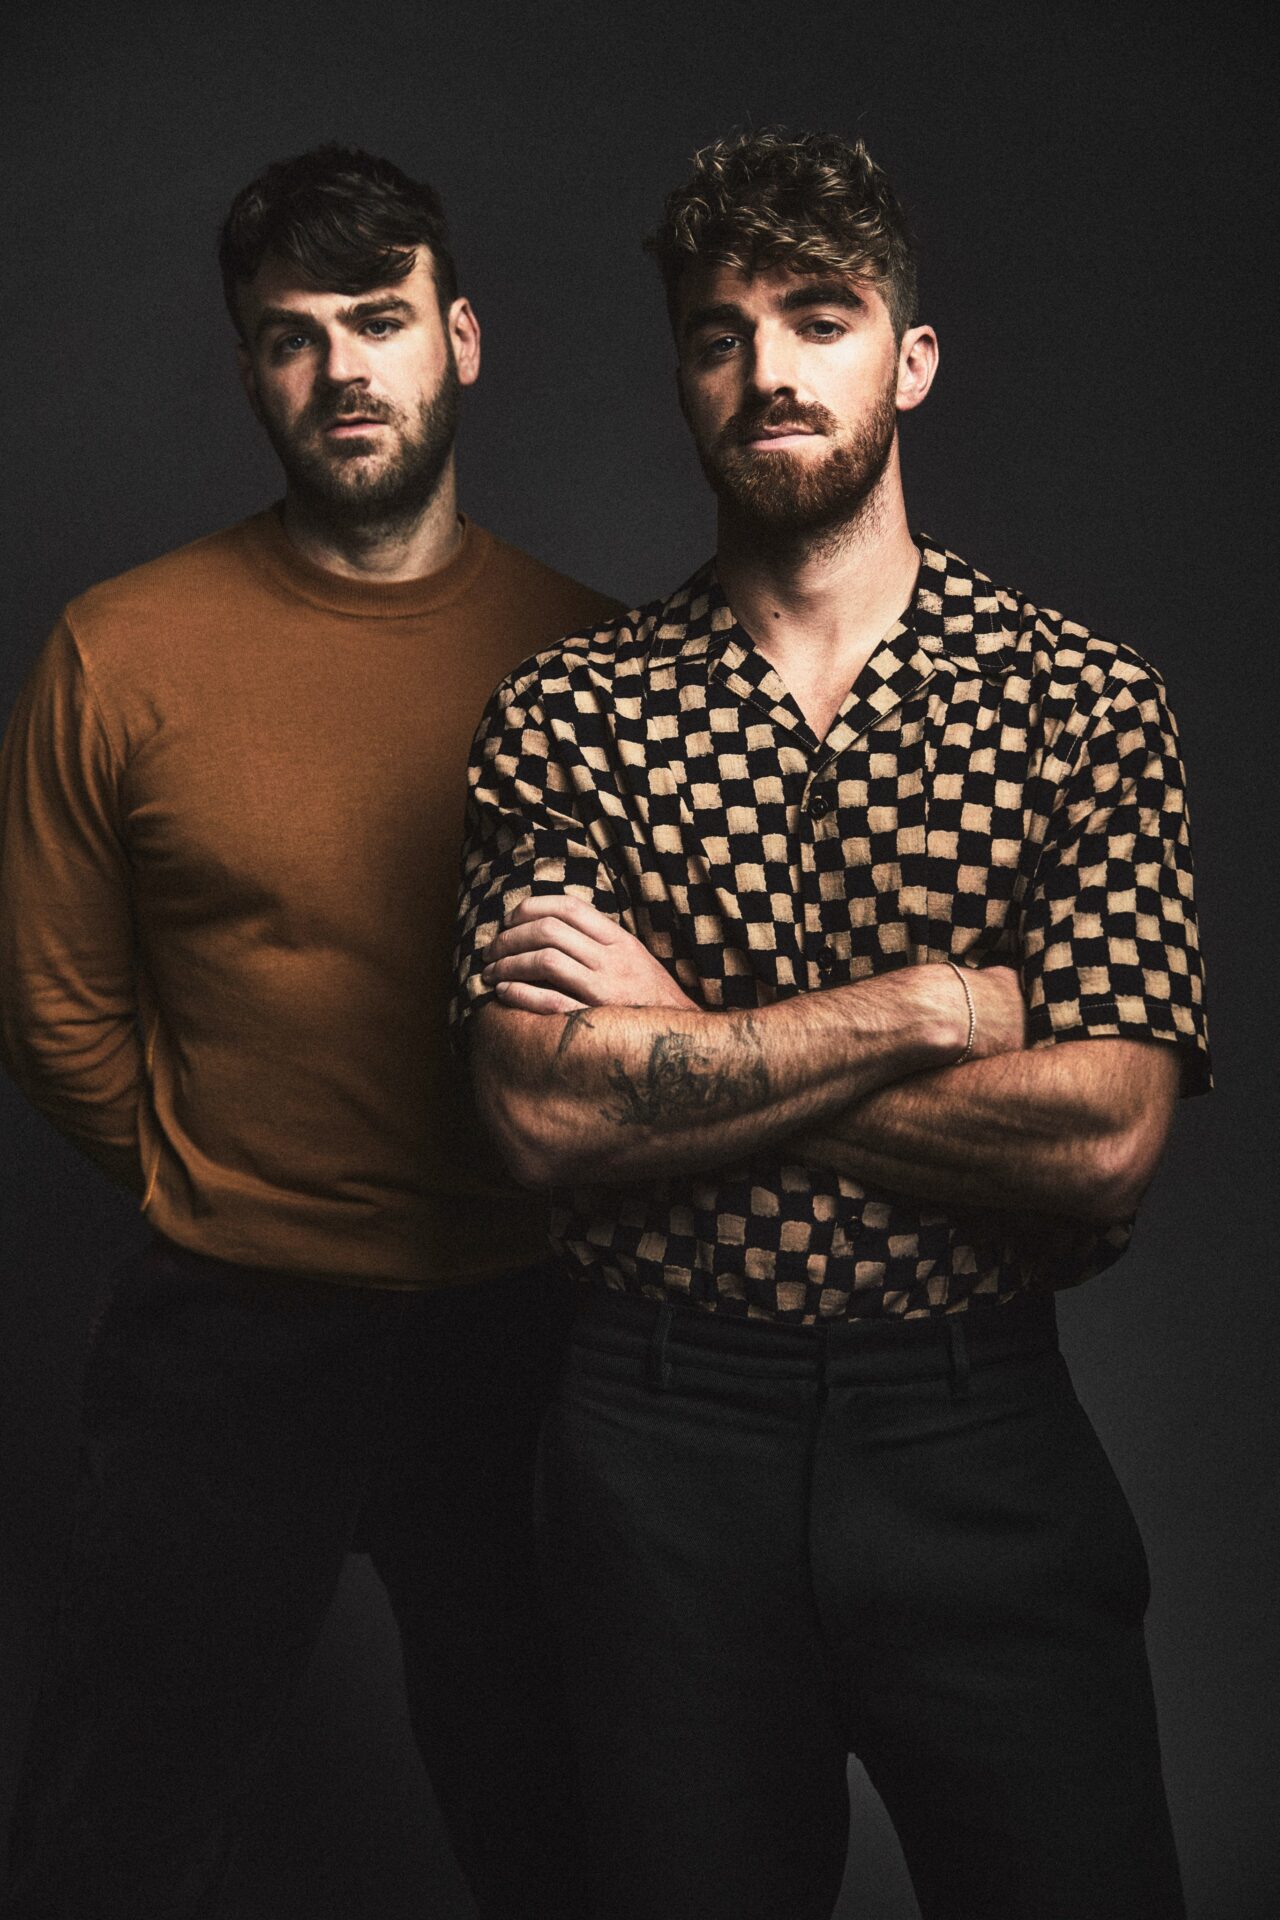 LISTEN TO "RIPTIDE," AN EMOTIVE SINGLE FROM THE CHAINSMOKERS' UPCOMING ALBUM.